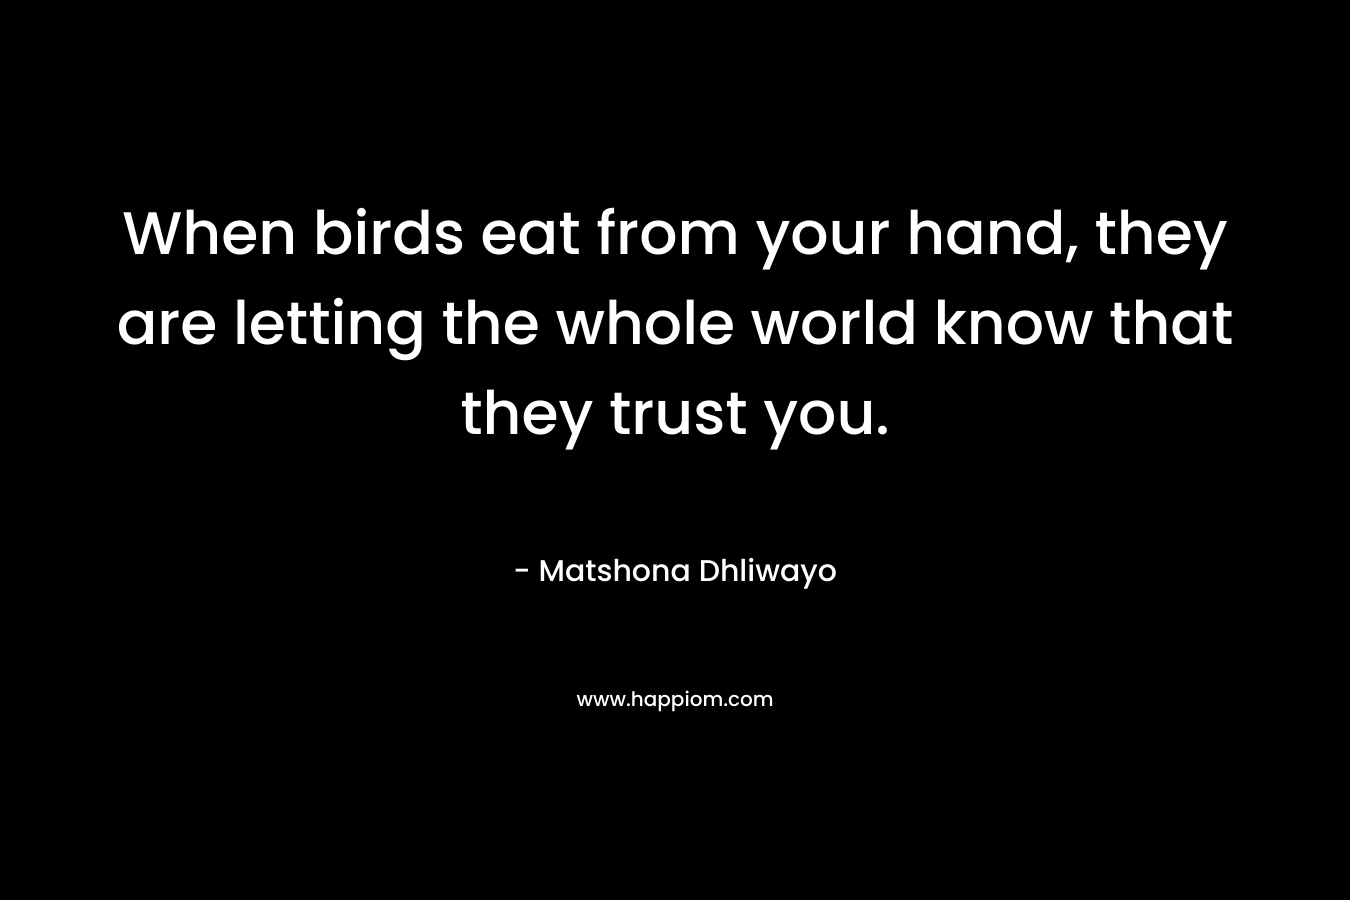 When birds eat from your hand, they are letting the whole world know that they trust you.